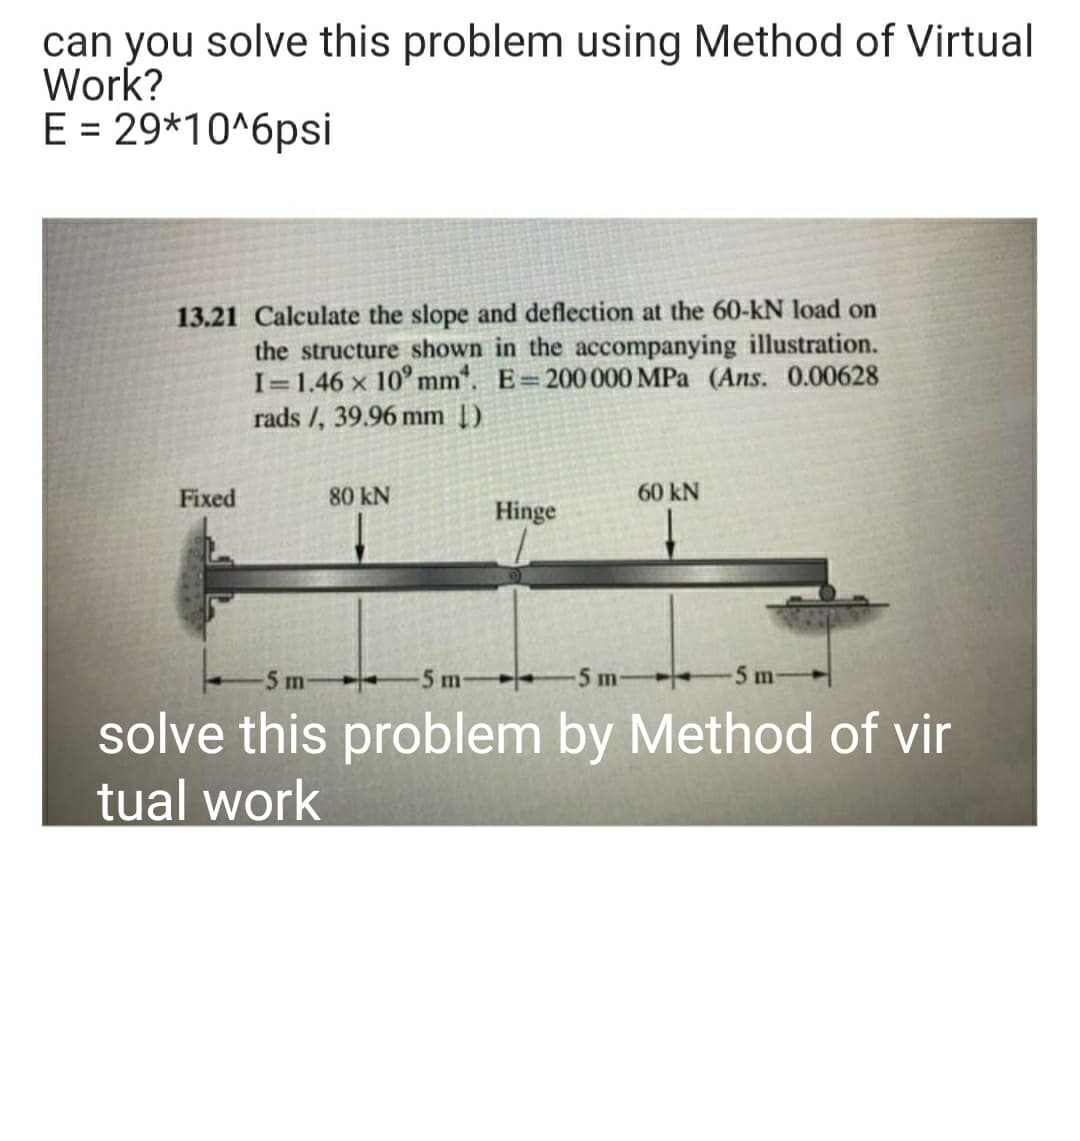 can you solve this problem using Method of Virtual
Work?
E = 29*10^6psi
%3D
13.21 Calculate the slope and deflection at the 60-kN load on
the structure shown in the accompanying illustration.
I=1.46 x 10° mm". E 200000 MPa (Ans. 0.00628
rads /, 39.96 mm [)
Fixed
80 kN
60 kN
Hinge
5m
5 m-
-5 m
5 m
solve this problem by Method of vir
tual work
